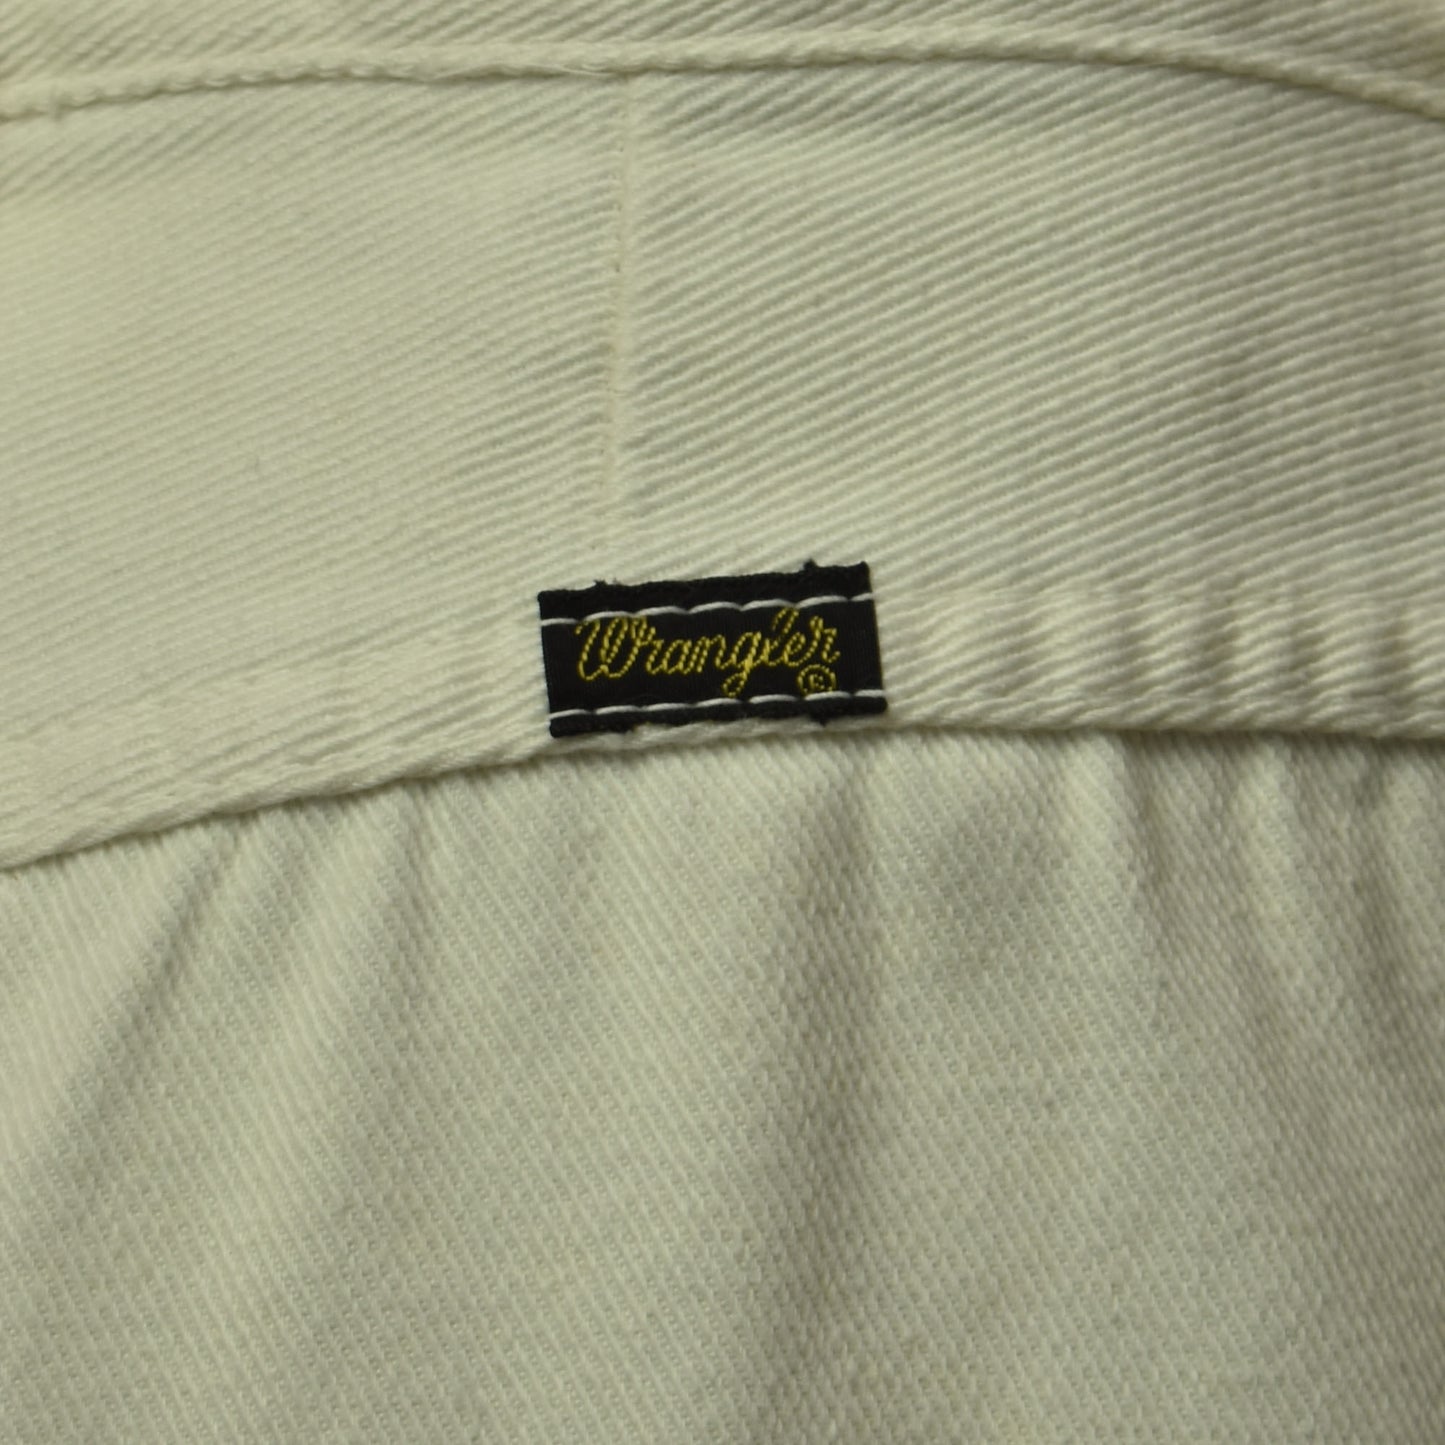 Vintage 1970's White Wrangler Flare Bell Bottoms Snap Button and Scovill Zipper Made in USA